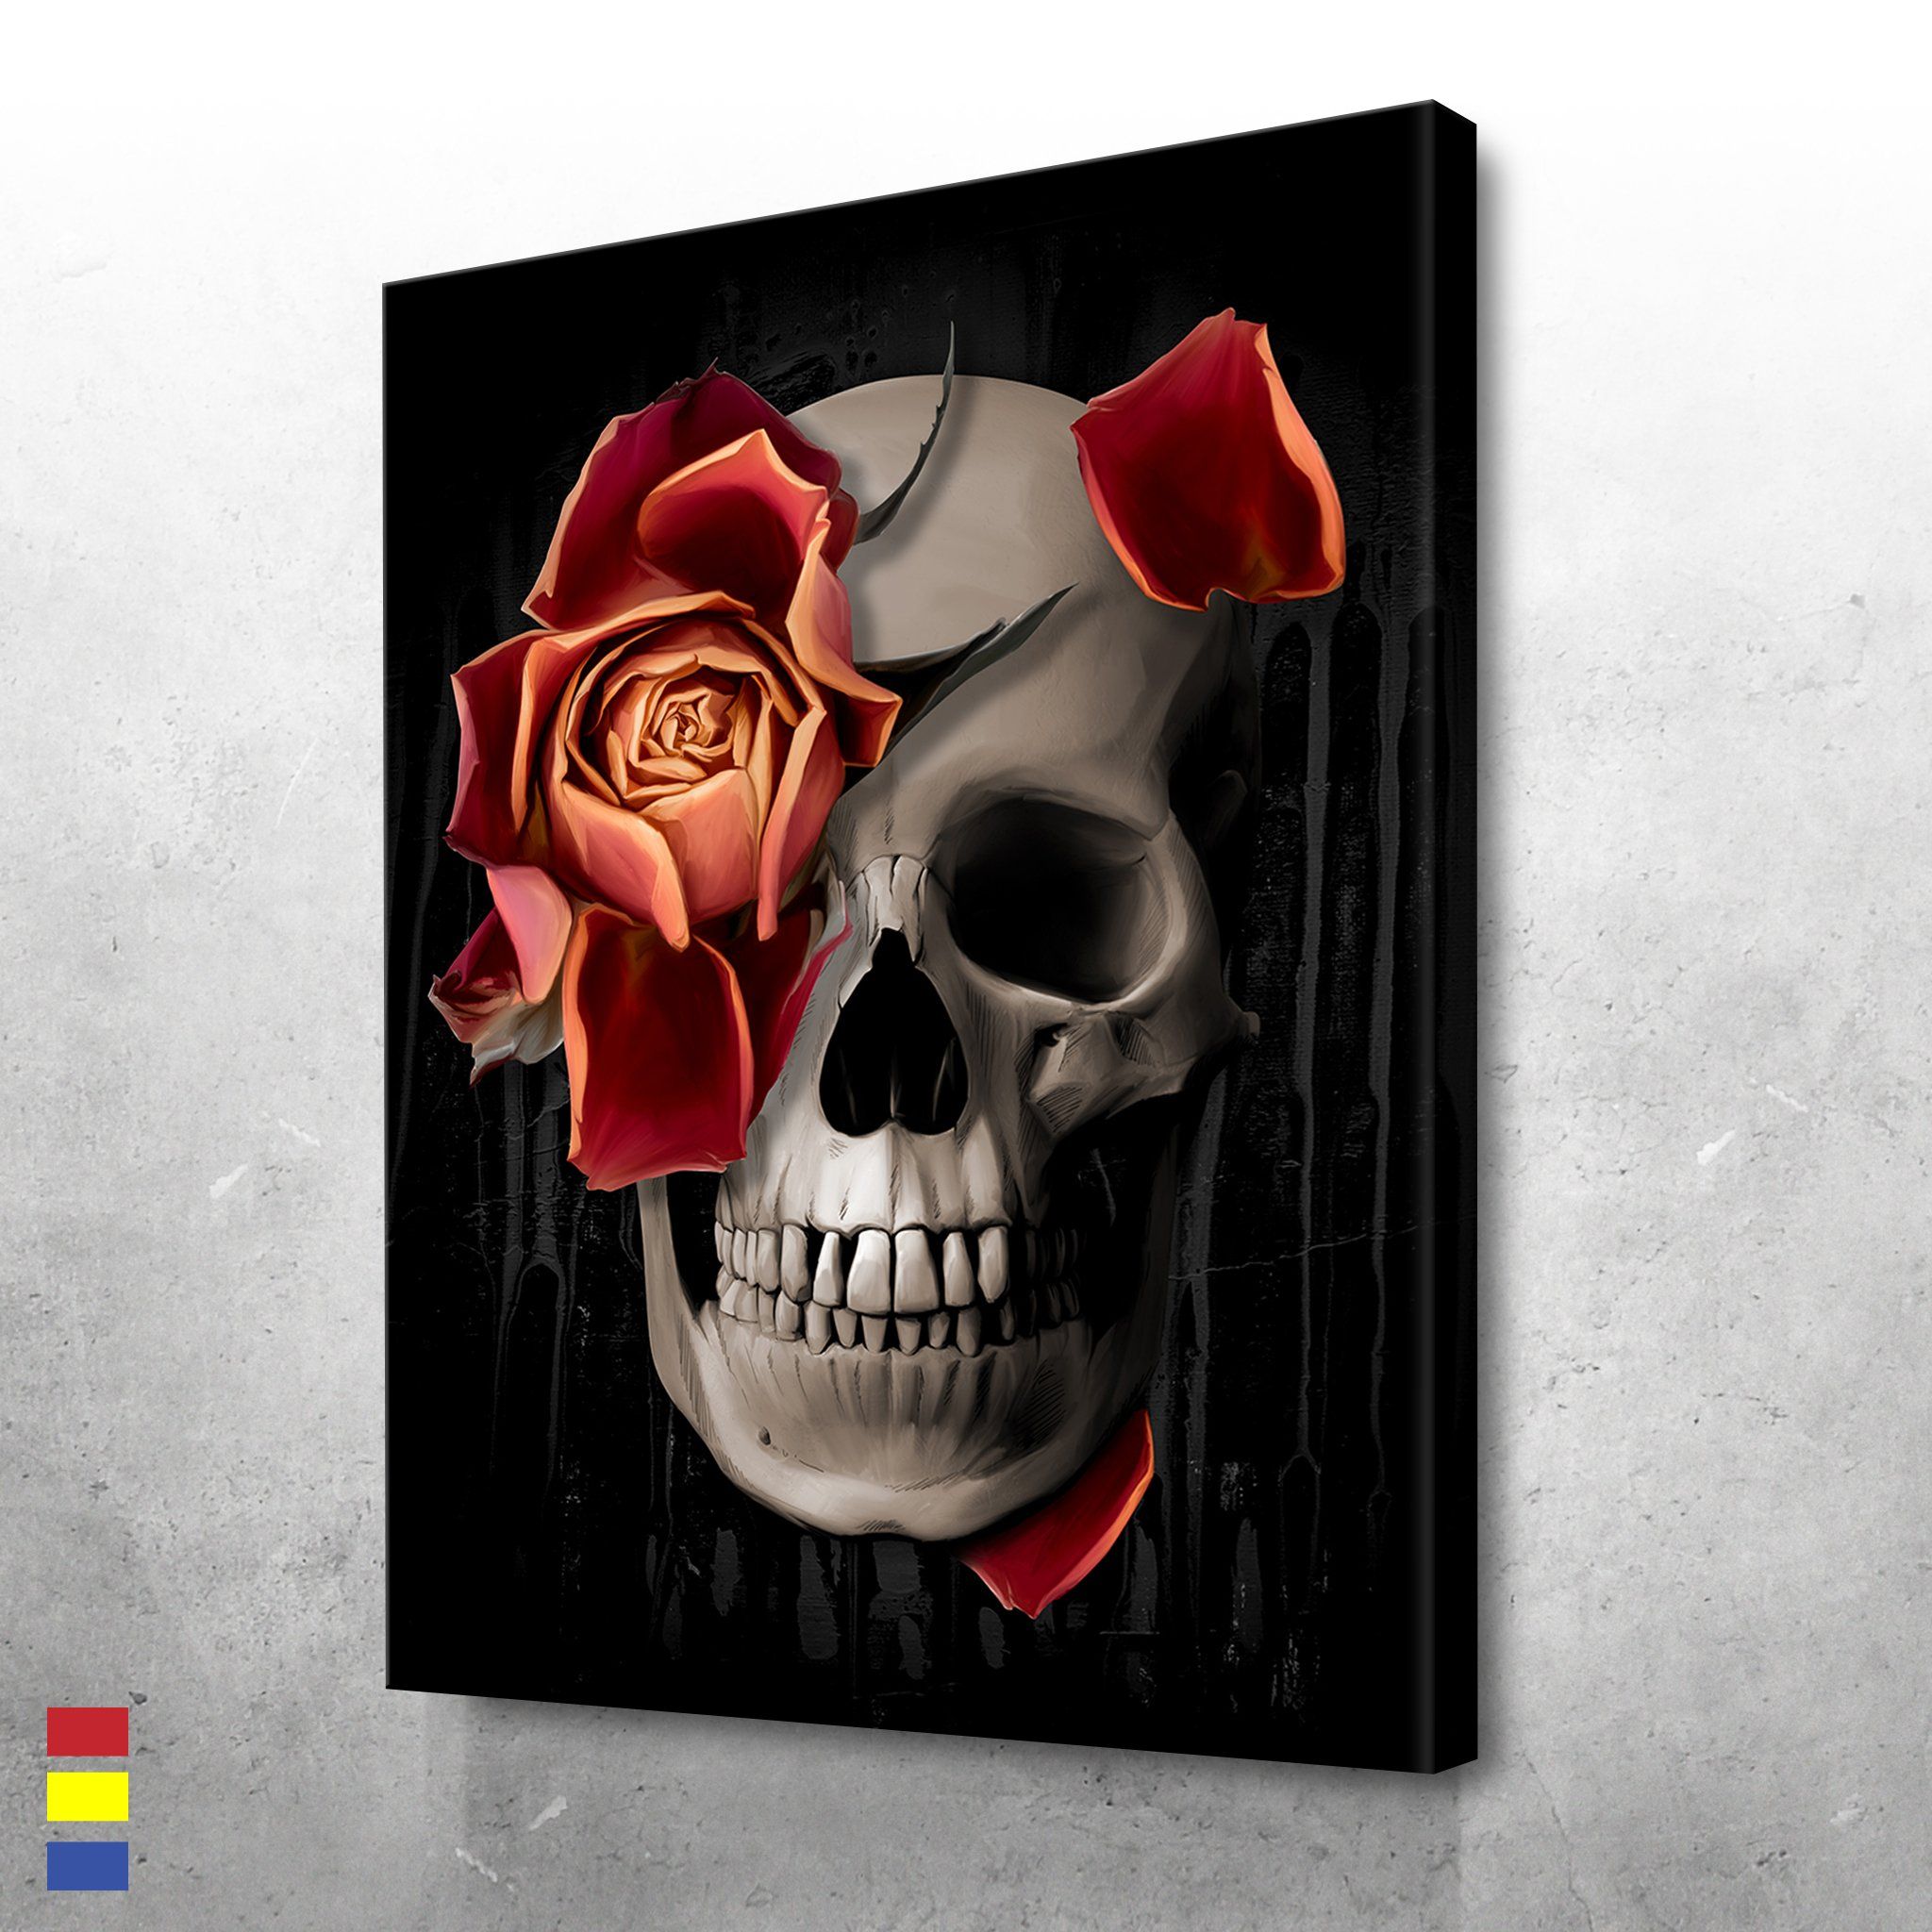 A Rose on the Skull